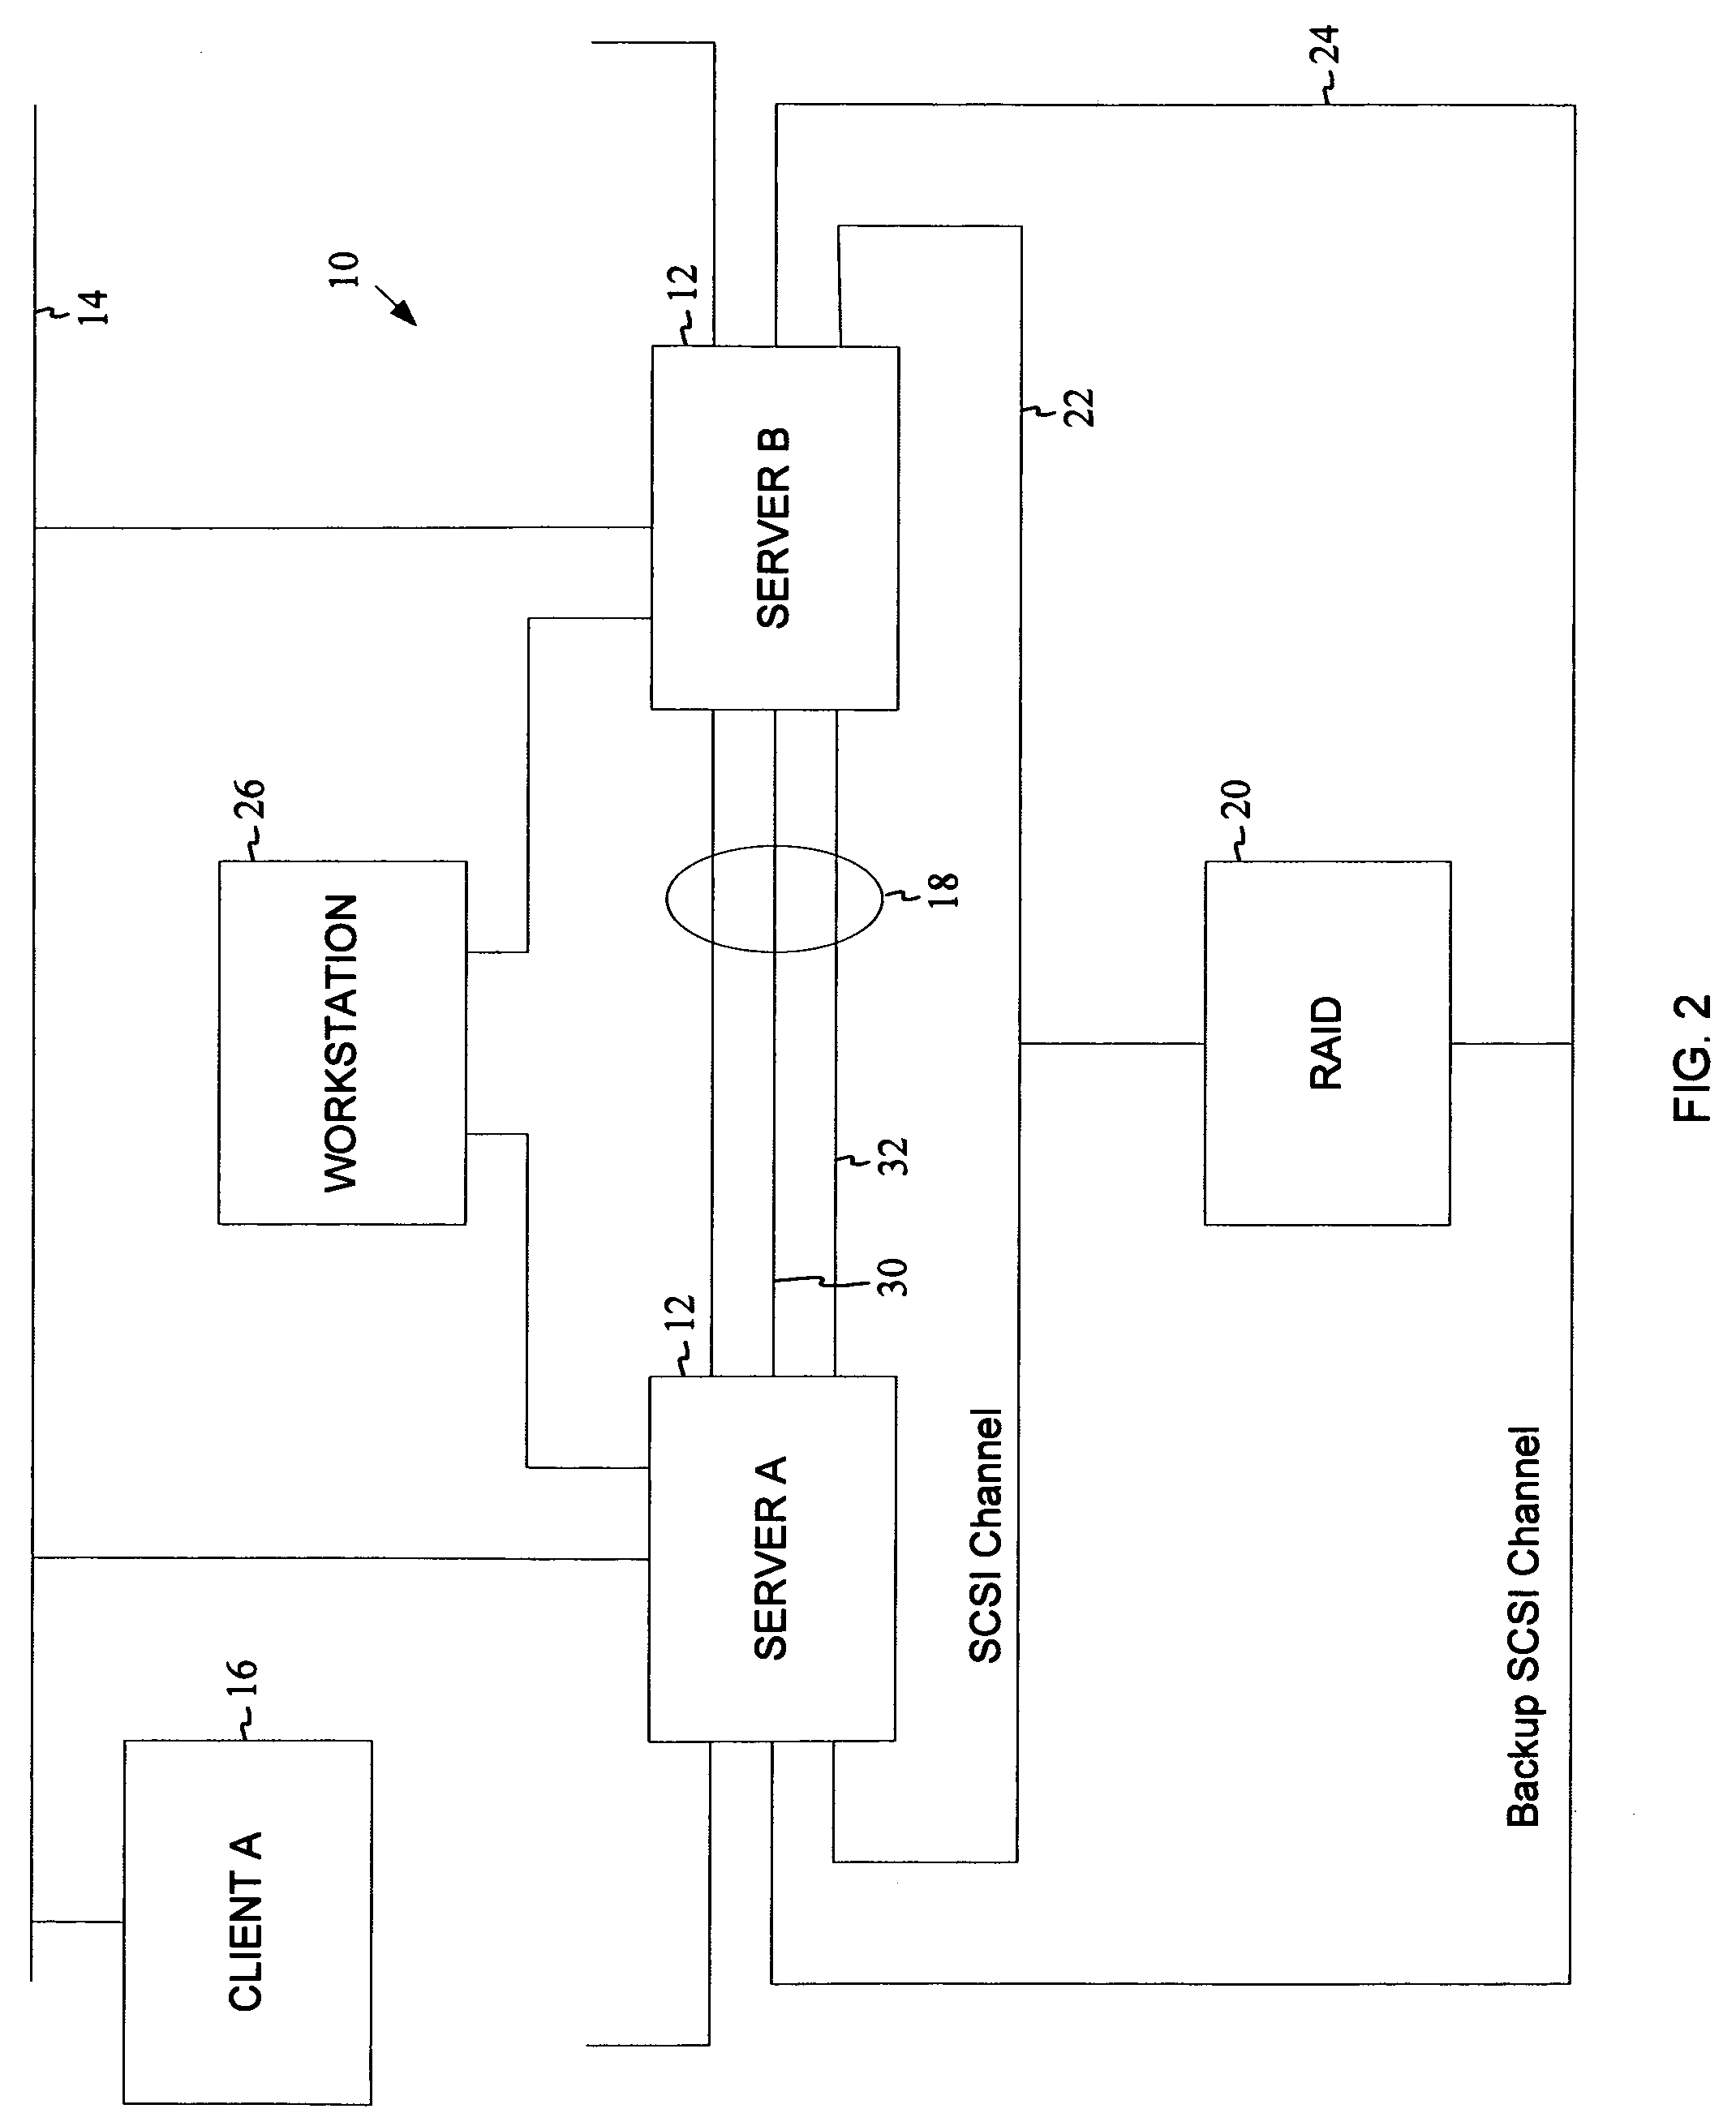 Maintaining process group membership for node clusters in high availability computing systems